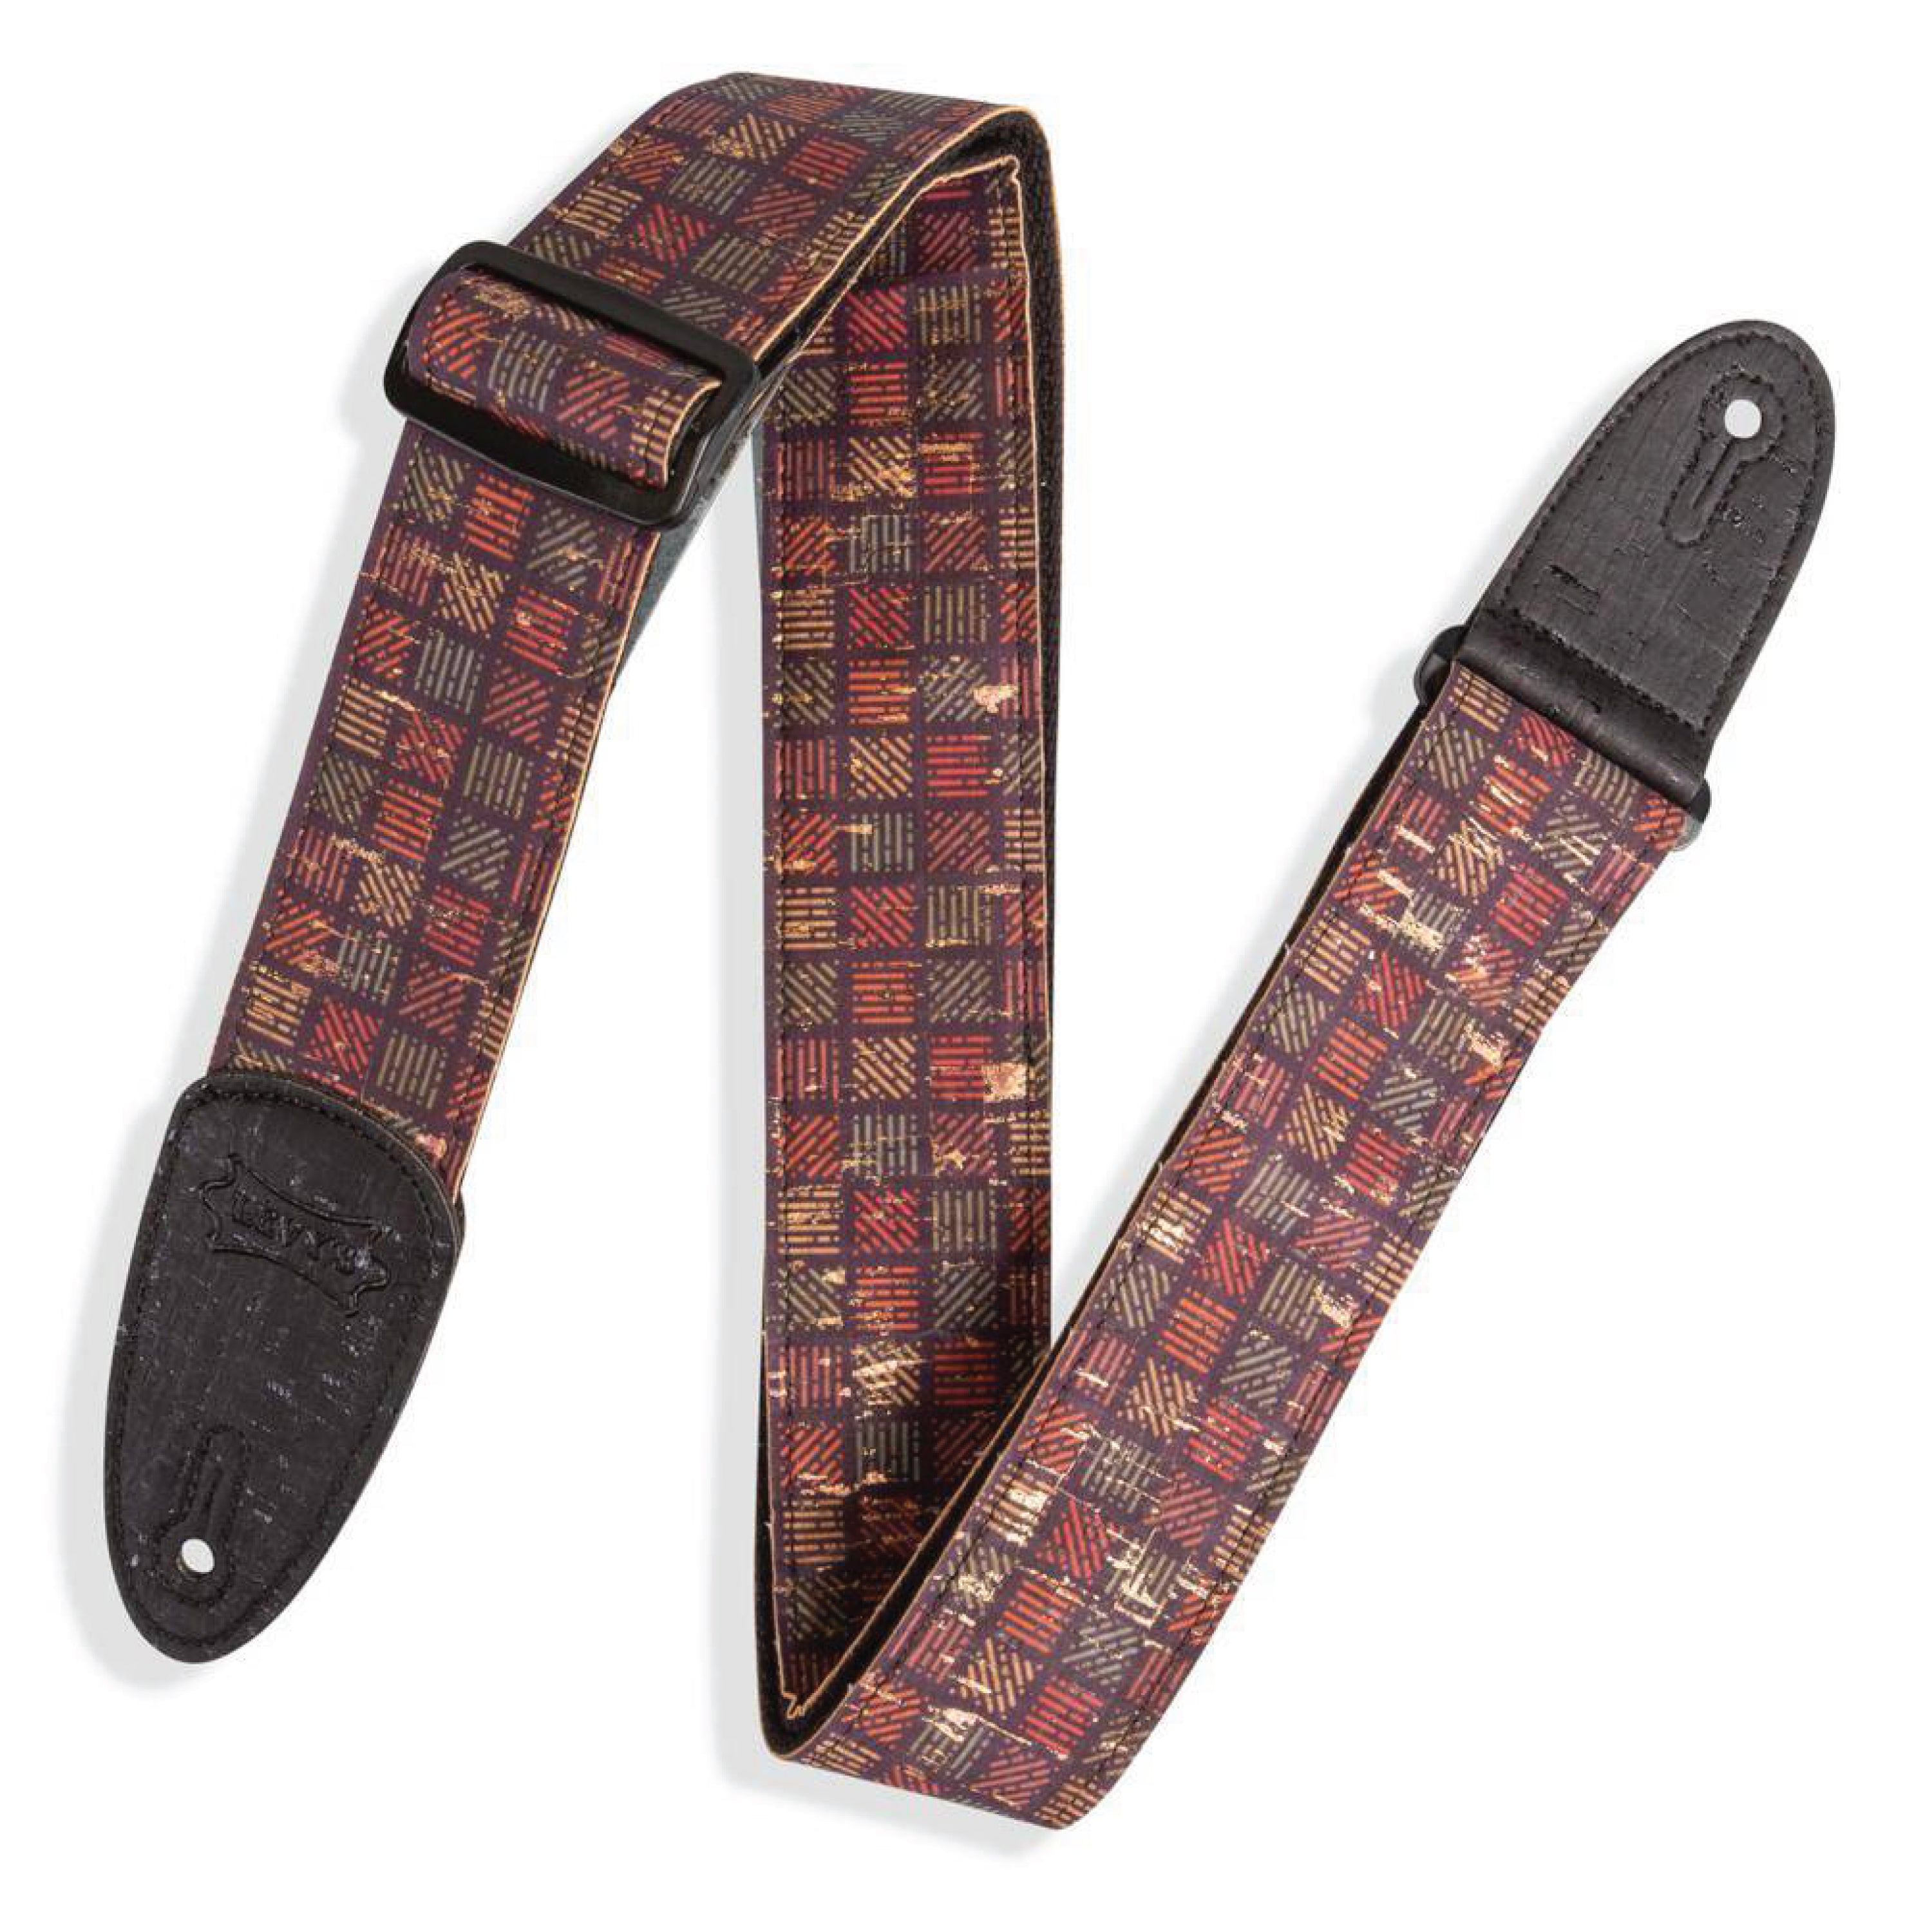 Levy's MX8-004 Specialty Series Guitar Strap, Orleans Cork Black, Red, Navy, Gold